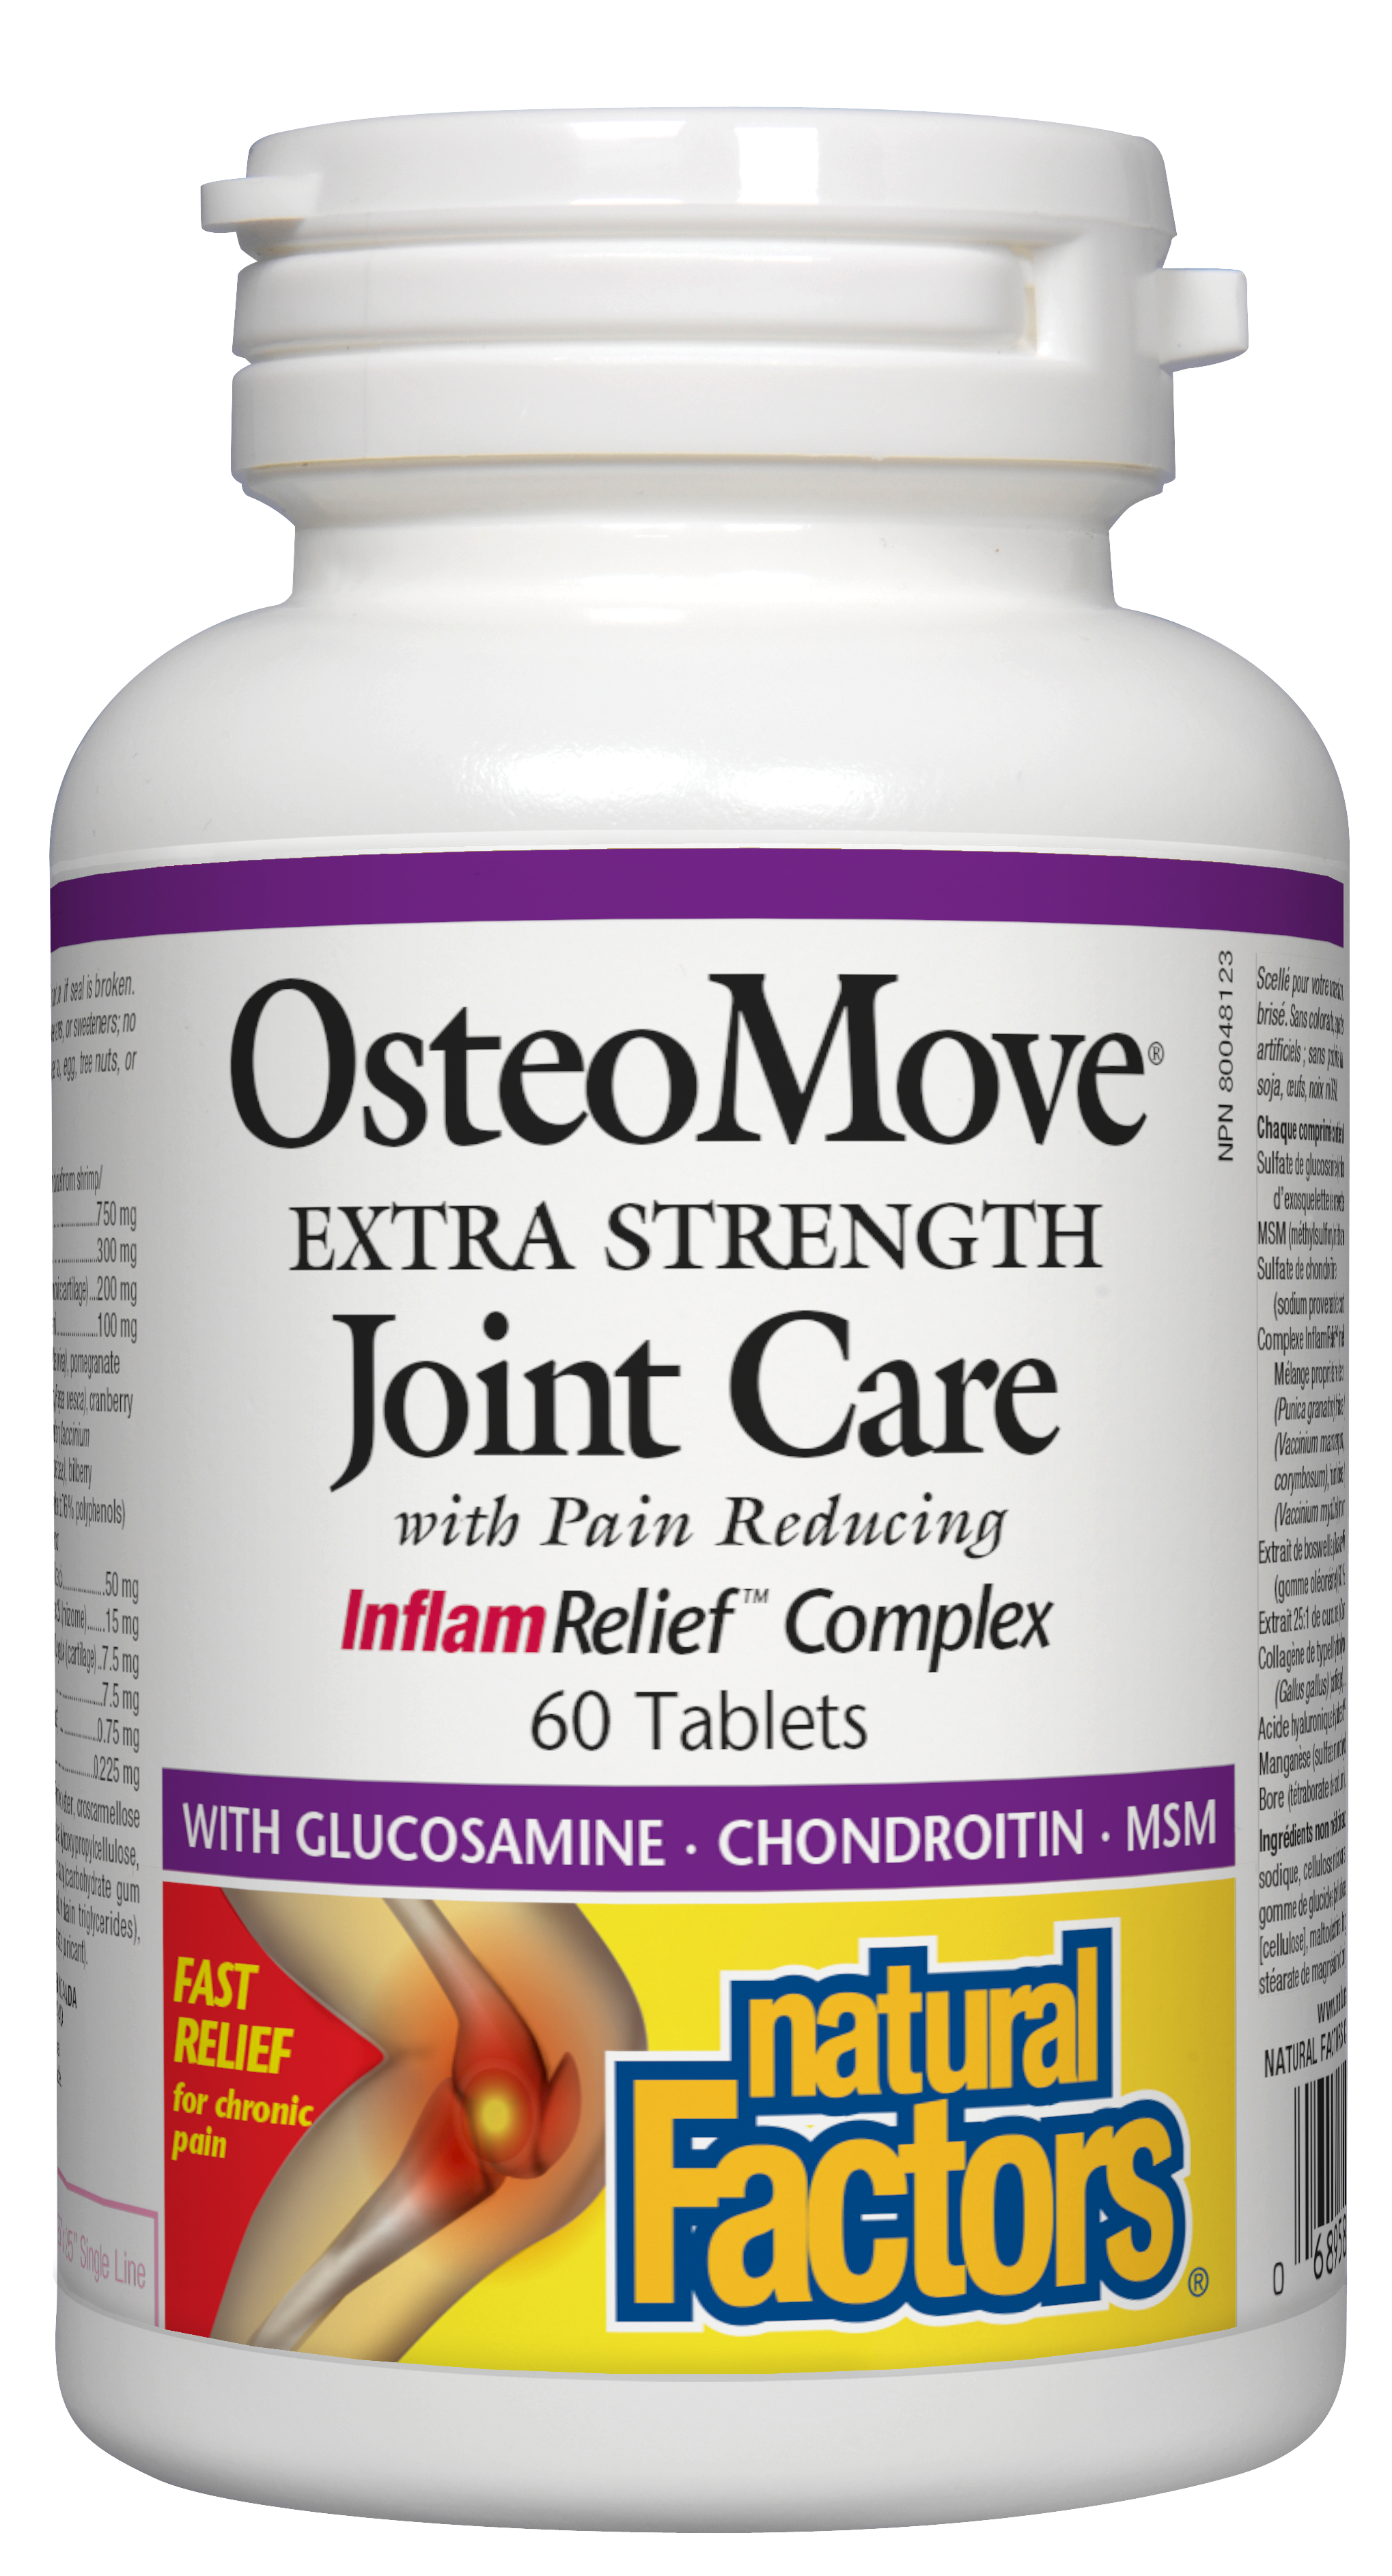 Natural Factors OsteoMove Extra Strength Joint Care 60 Tablets